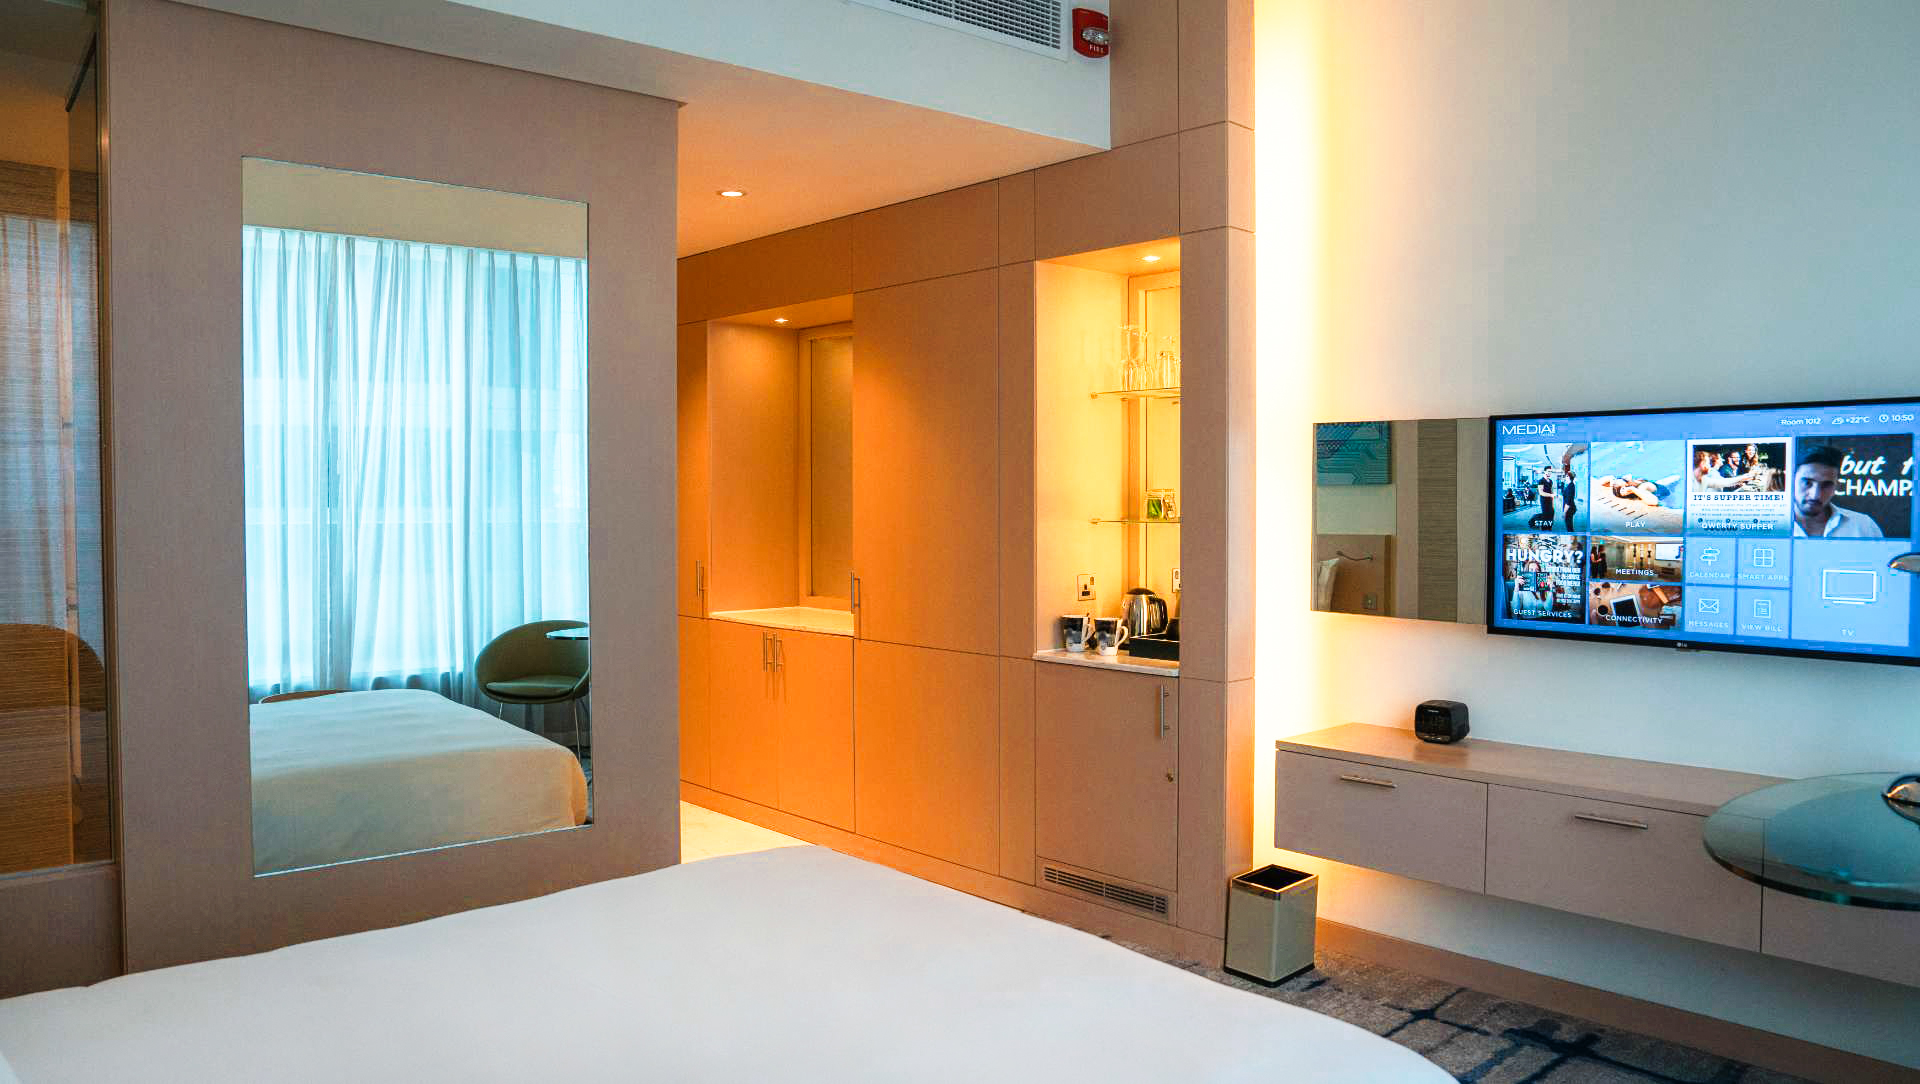 Media One Hotel room showing a tv, mirror and wardrobe space.